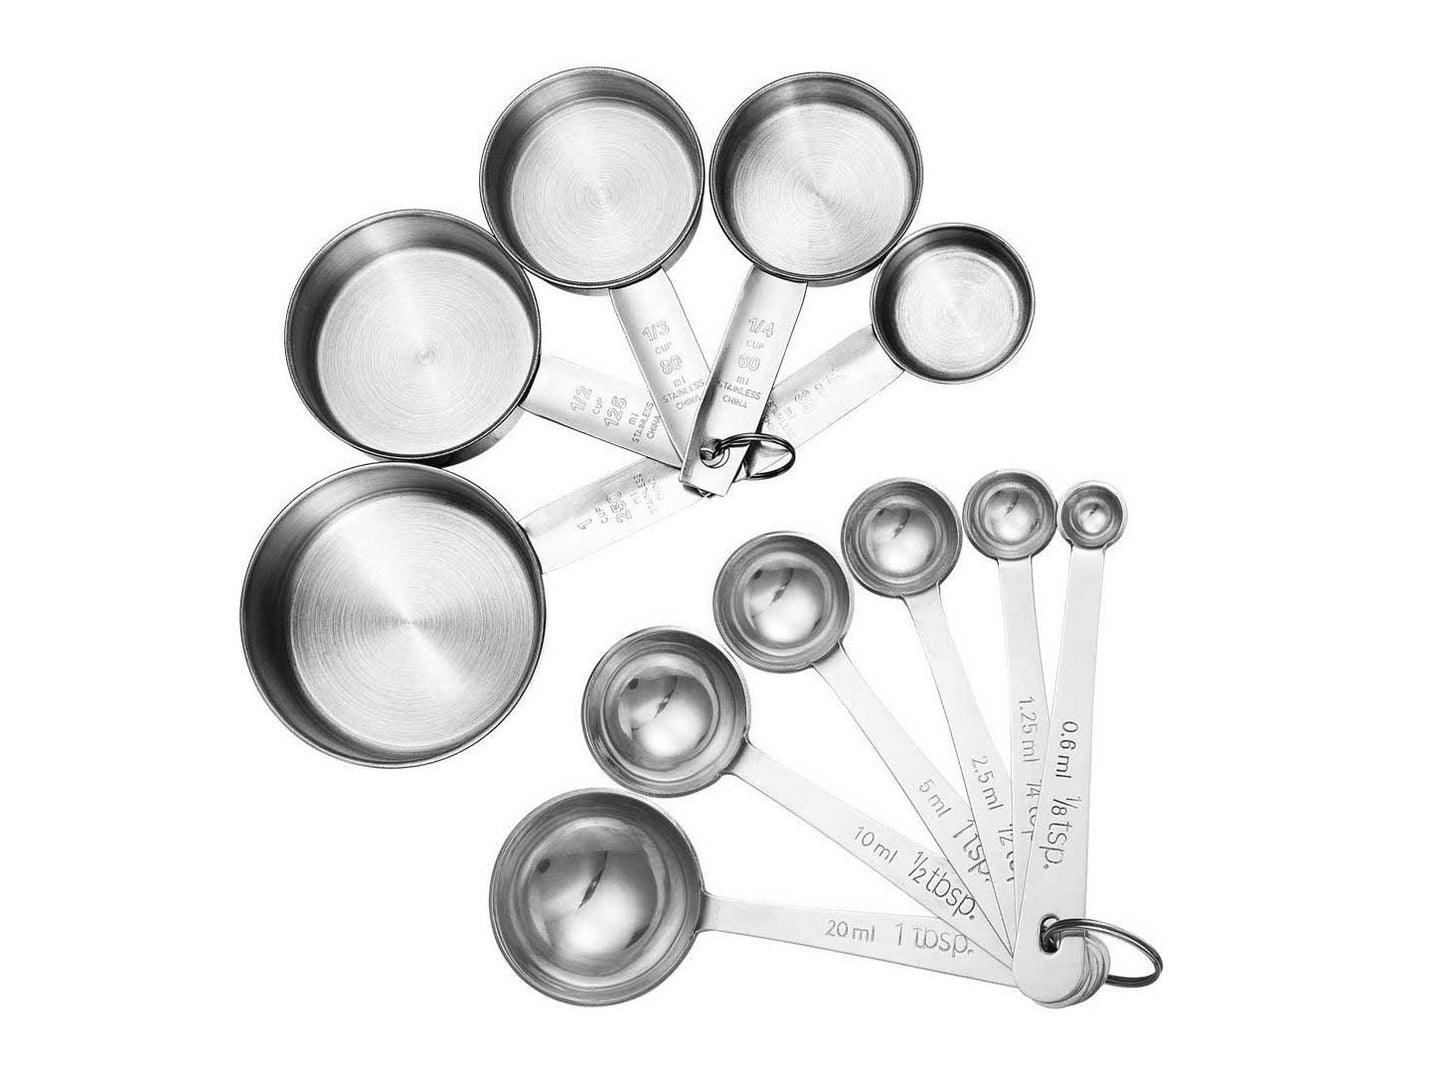 Dry Measuring cups